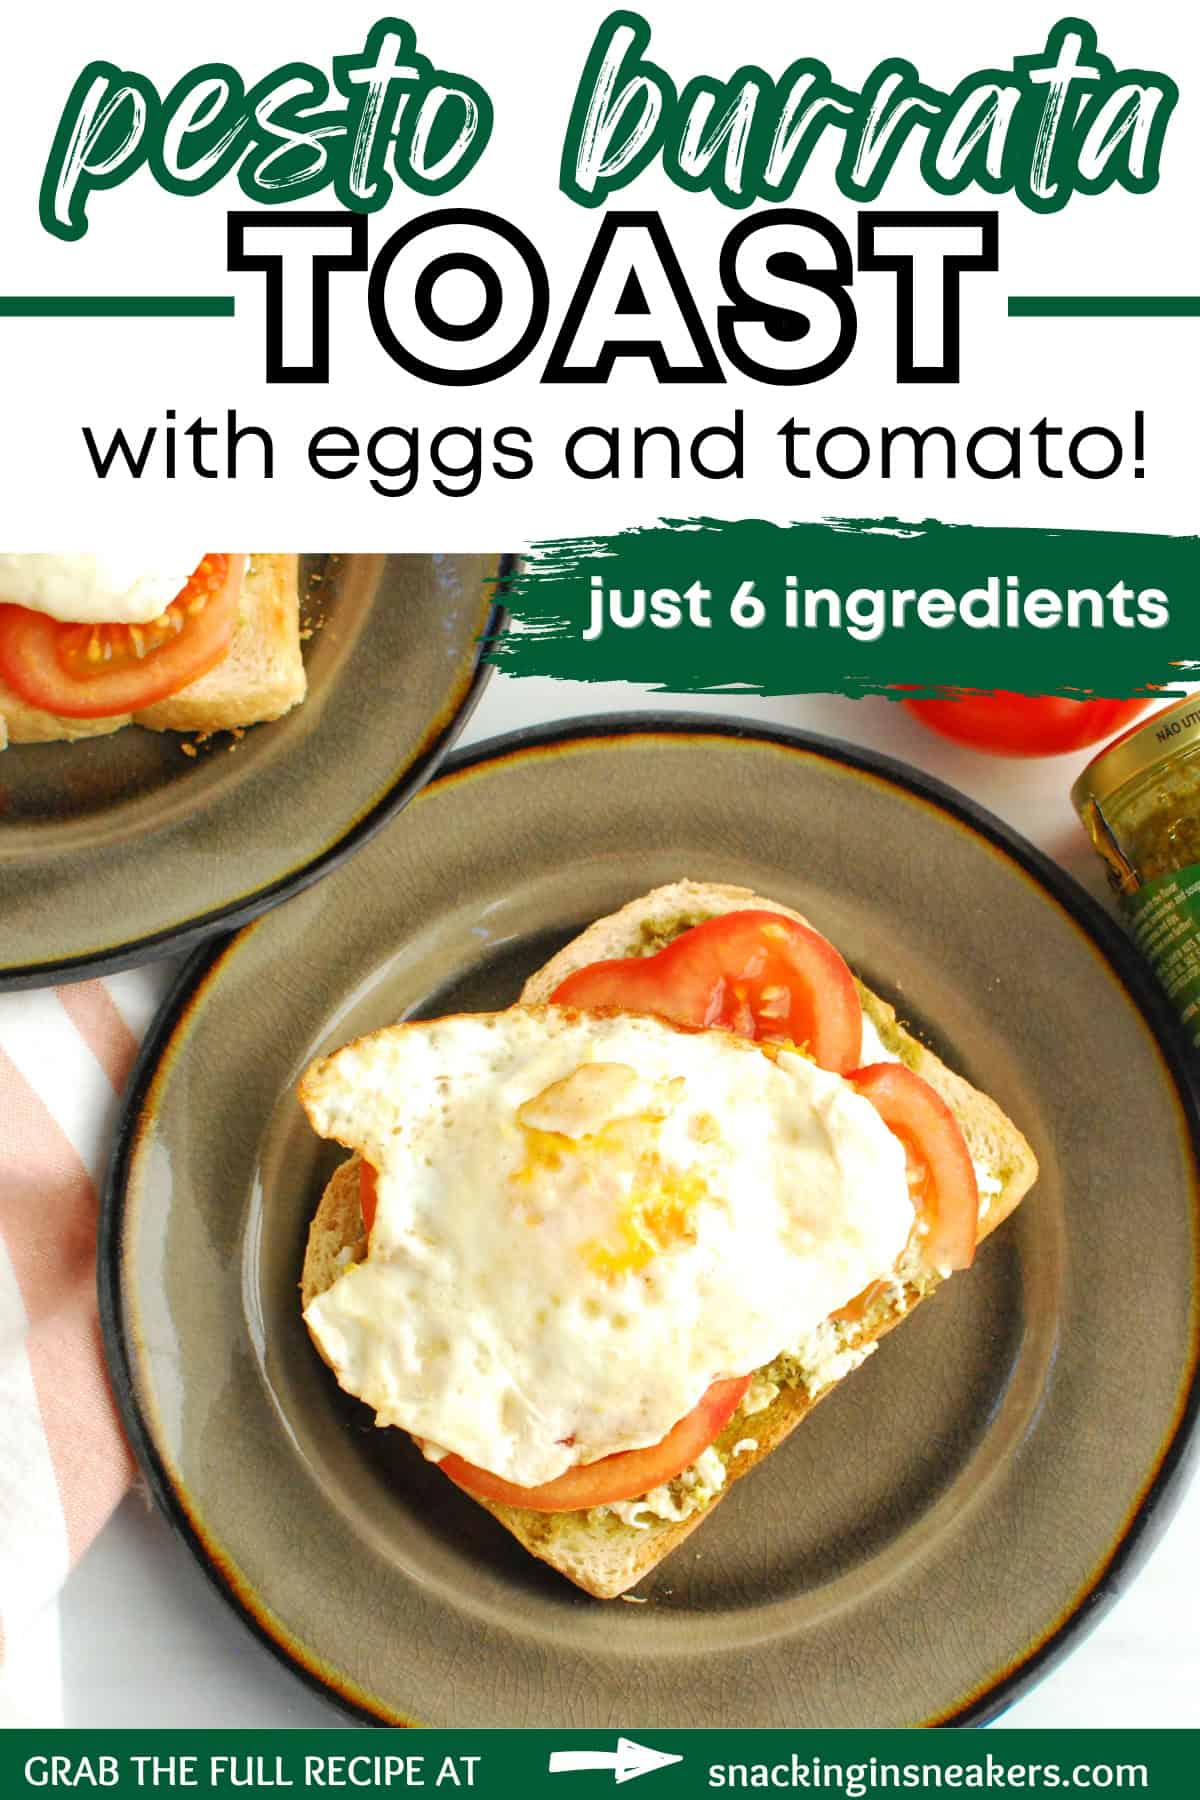 A piece of pesto burrata toast with egg and tomato with a text overlay that says the name of the recipe.